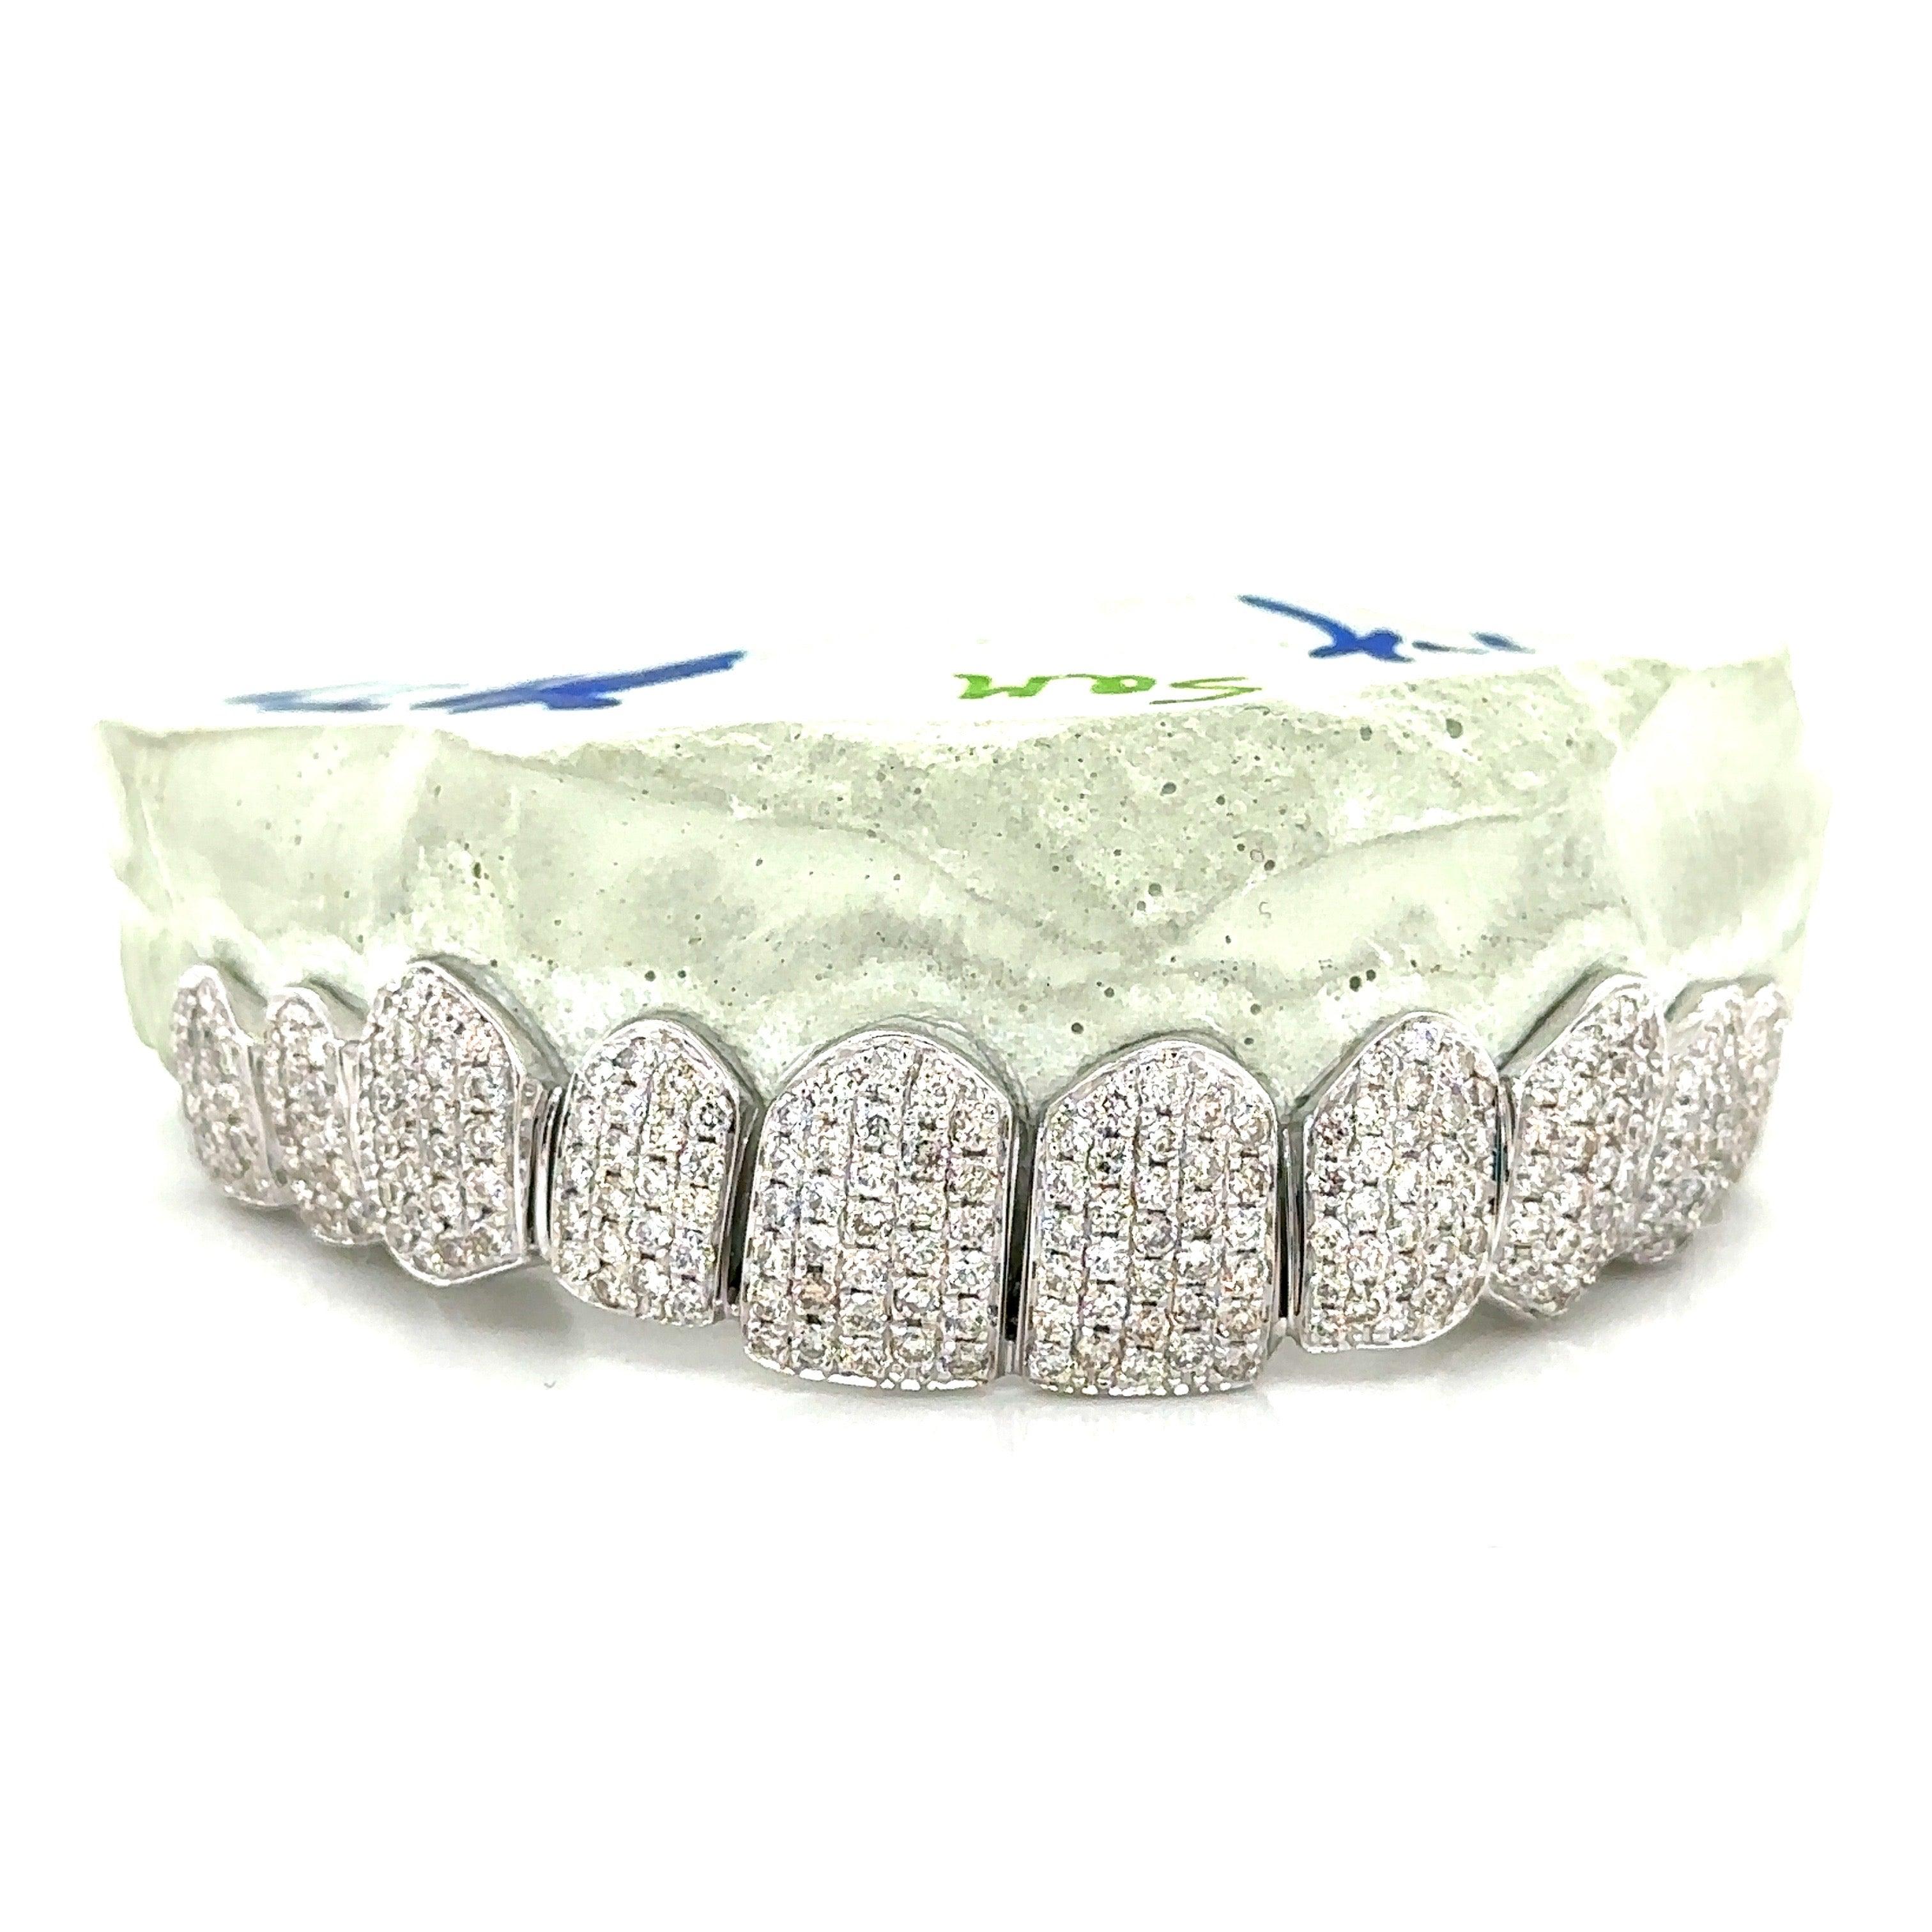 10pc White Gold Honeycomb Top Grillz - Seattle Gold Grillz